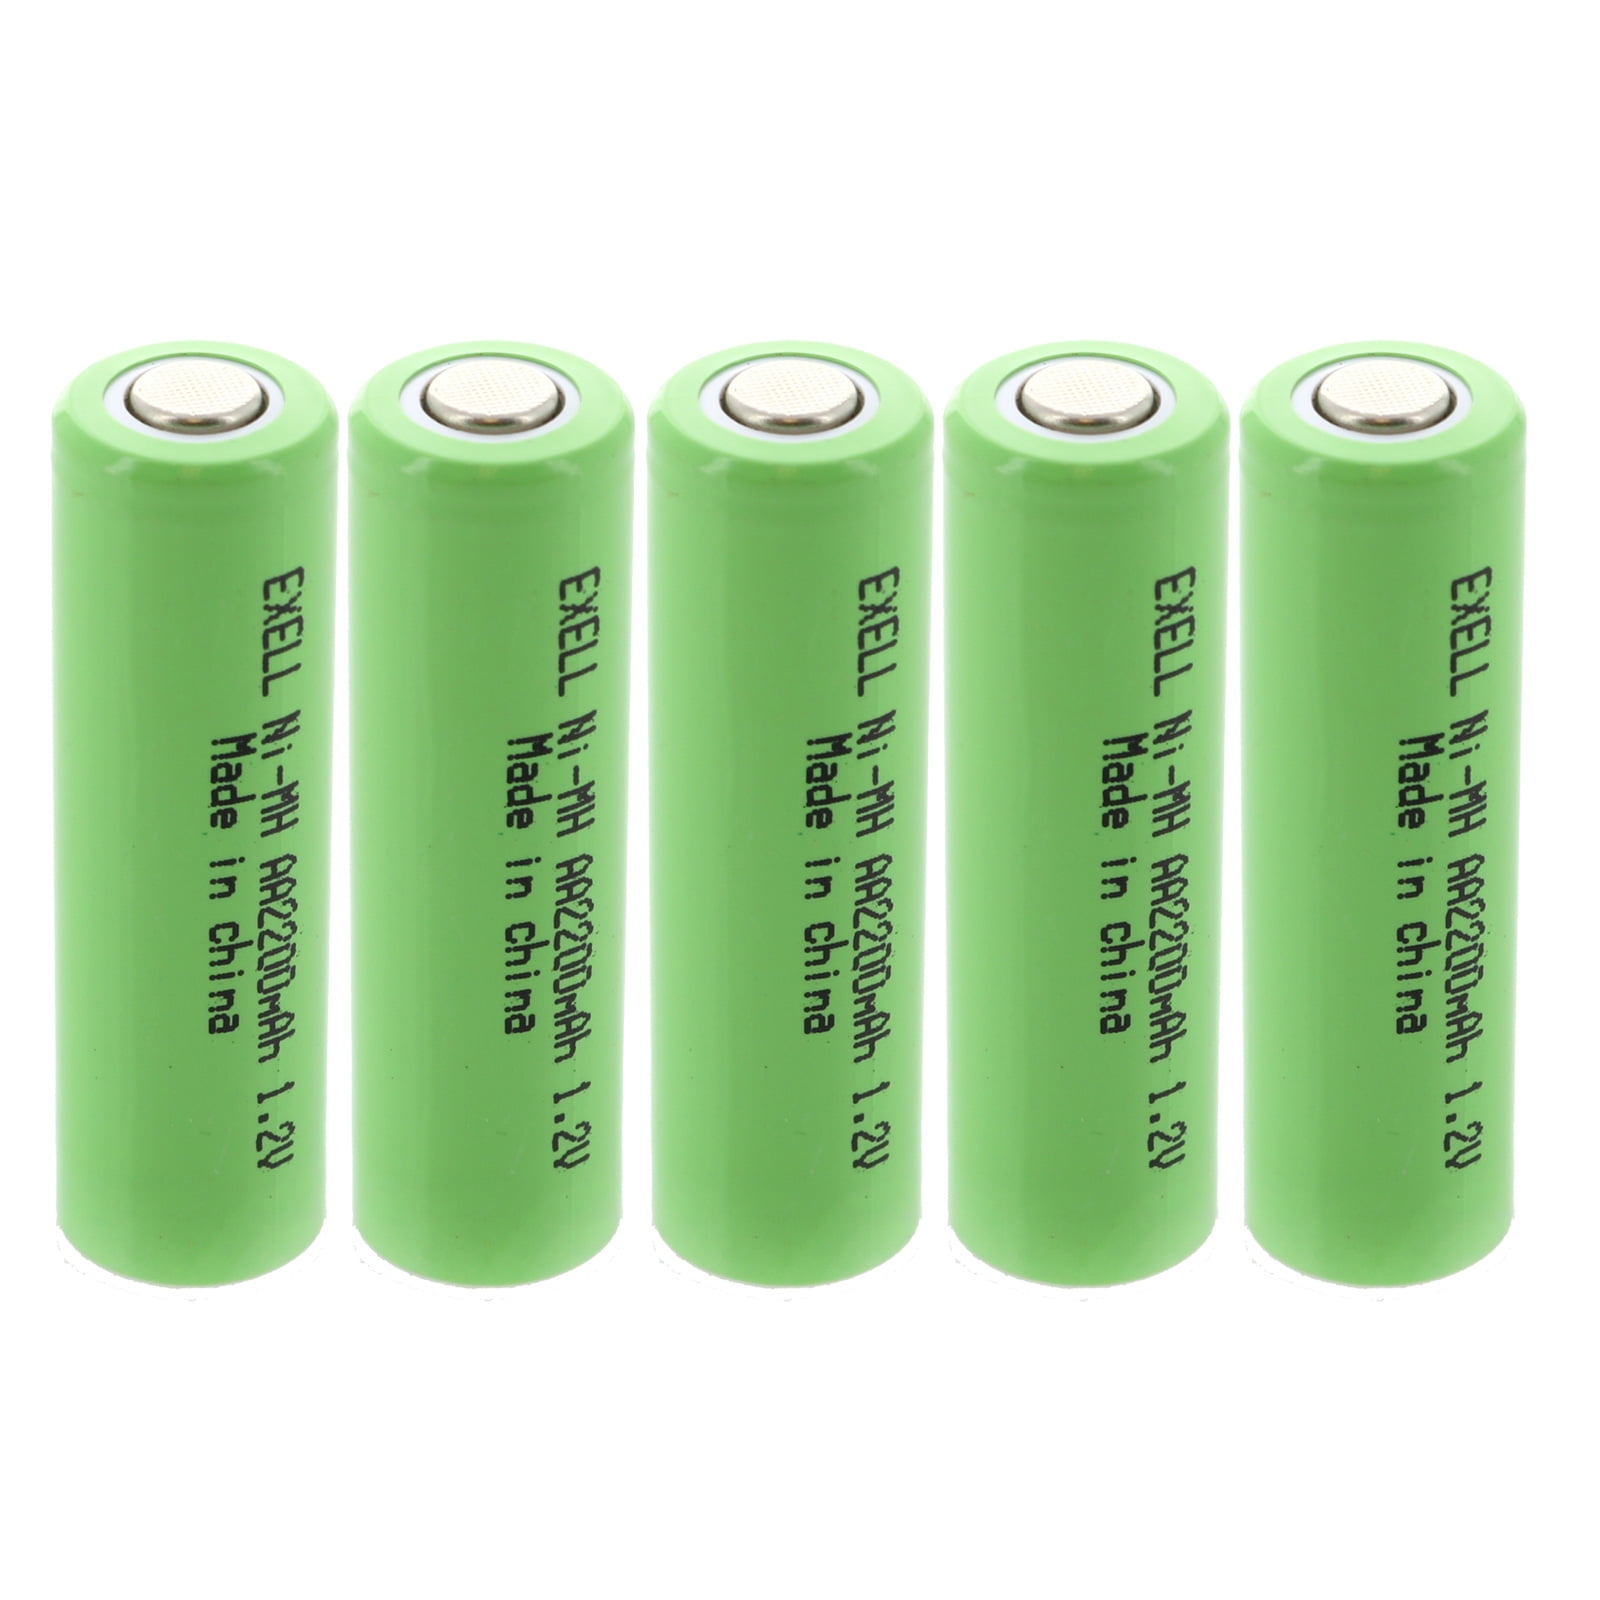 Exell 1.2V 2000mAh NiCD C Rechargeable Battery Button Top Cell Fast USA Ship 